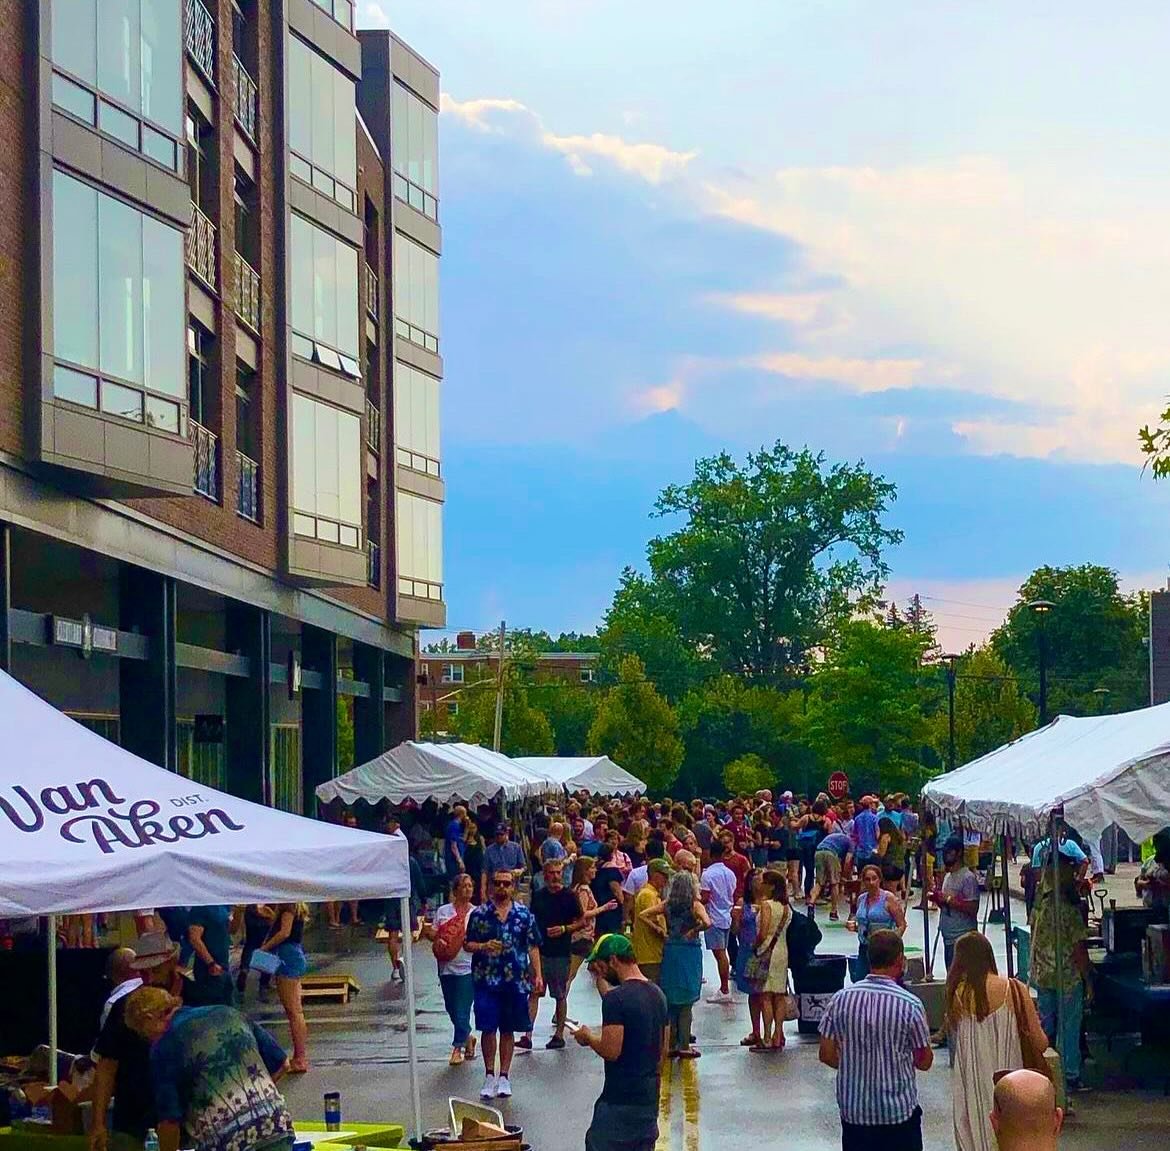 Nearly 5 years of memories in the @thevanakendistrict! Remember when 700 people came out for our beer fest during covid? 

#craftcollective #vanakendistrict #vanakenmarkethall #craftbeer #summer